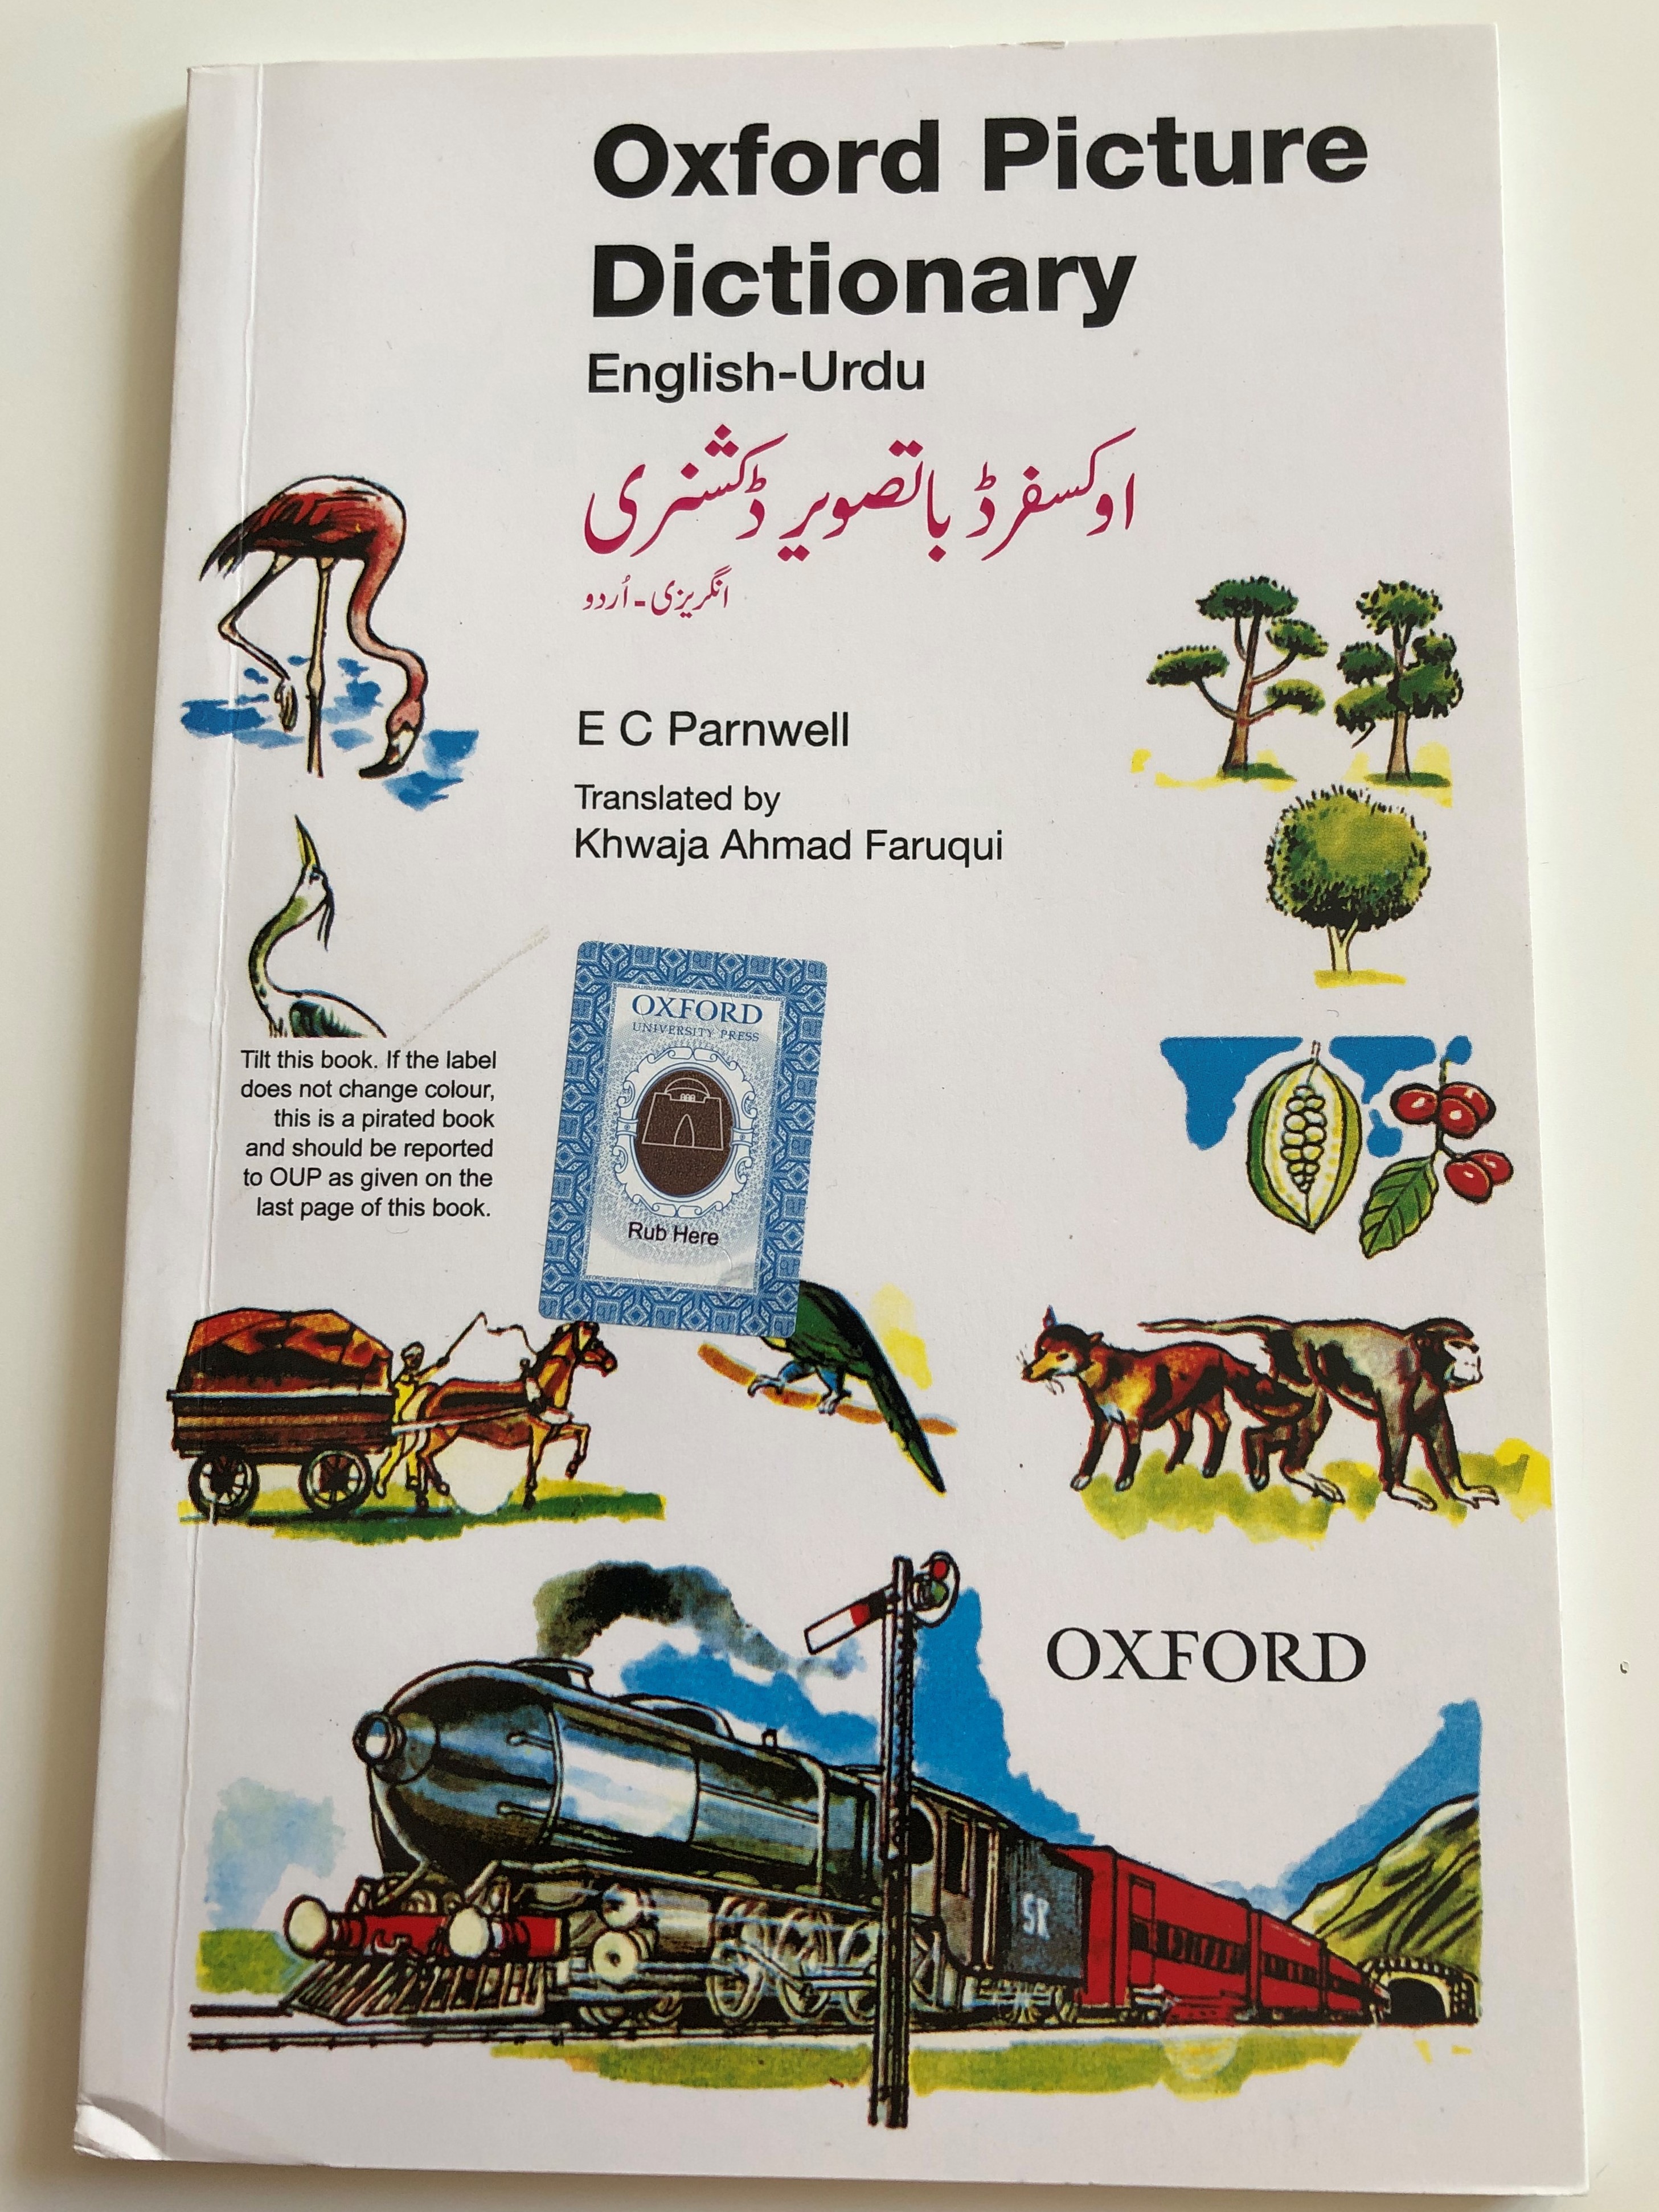 oxford-picture-dictionary-english-urdu-by-e.-c-parnwel-1-.jpg